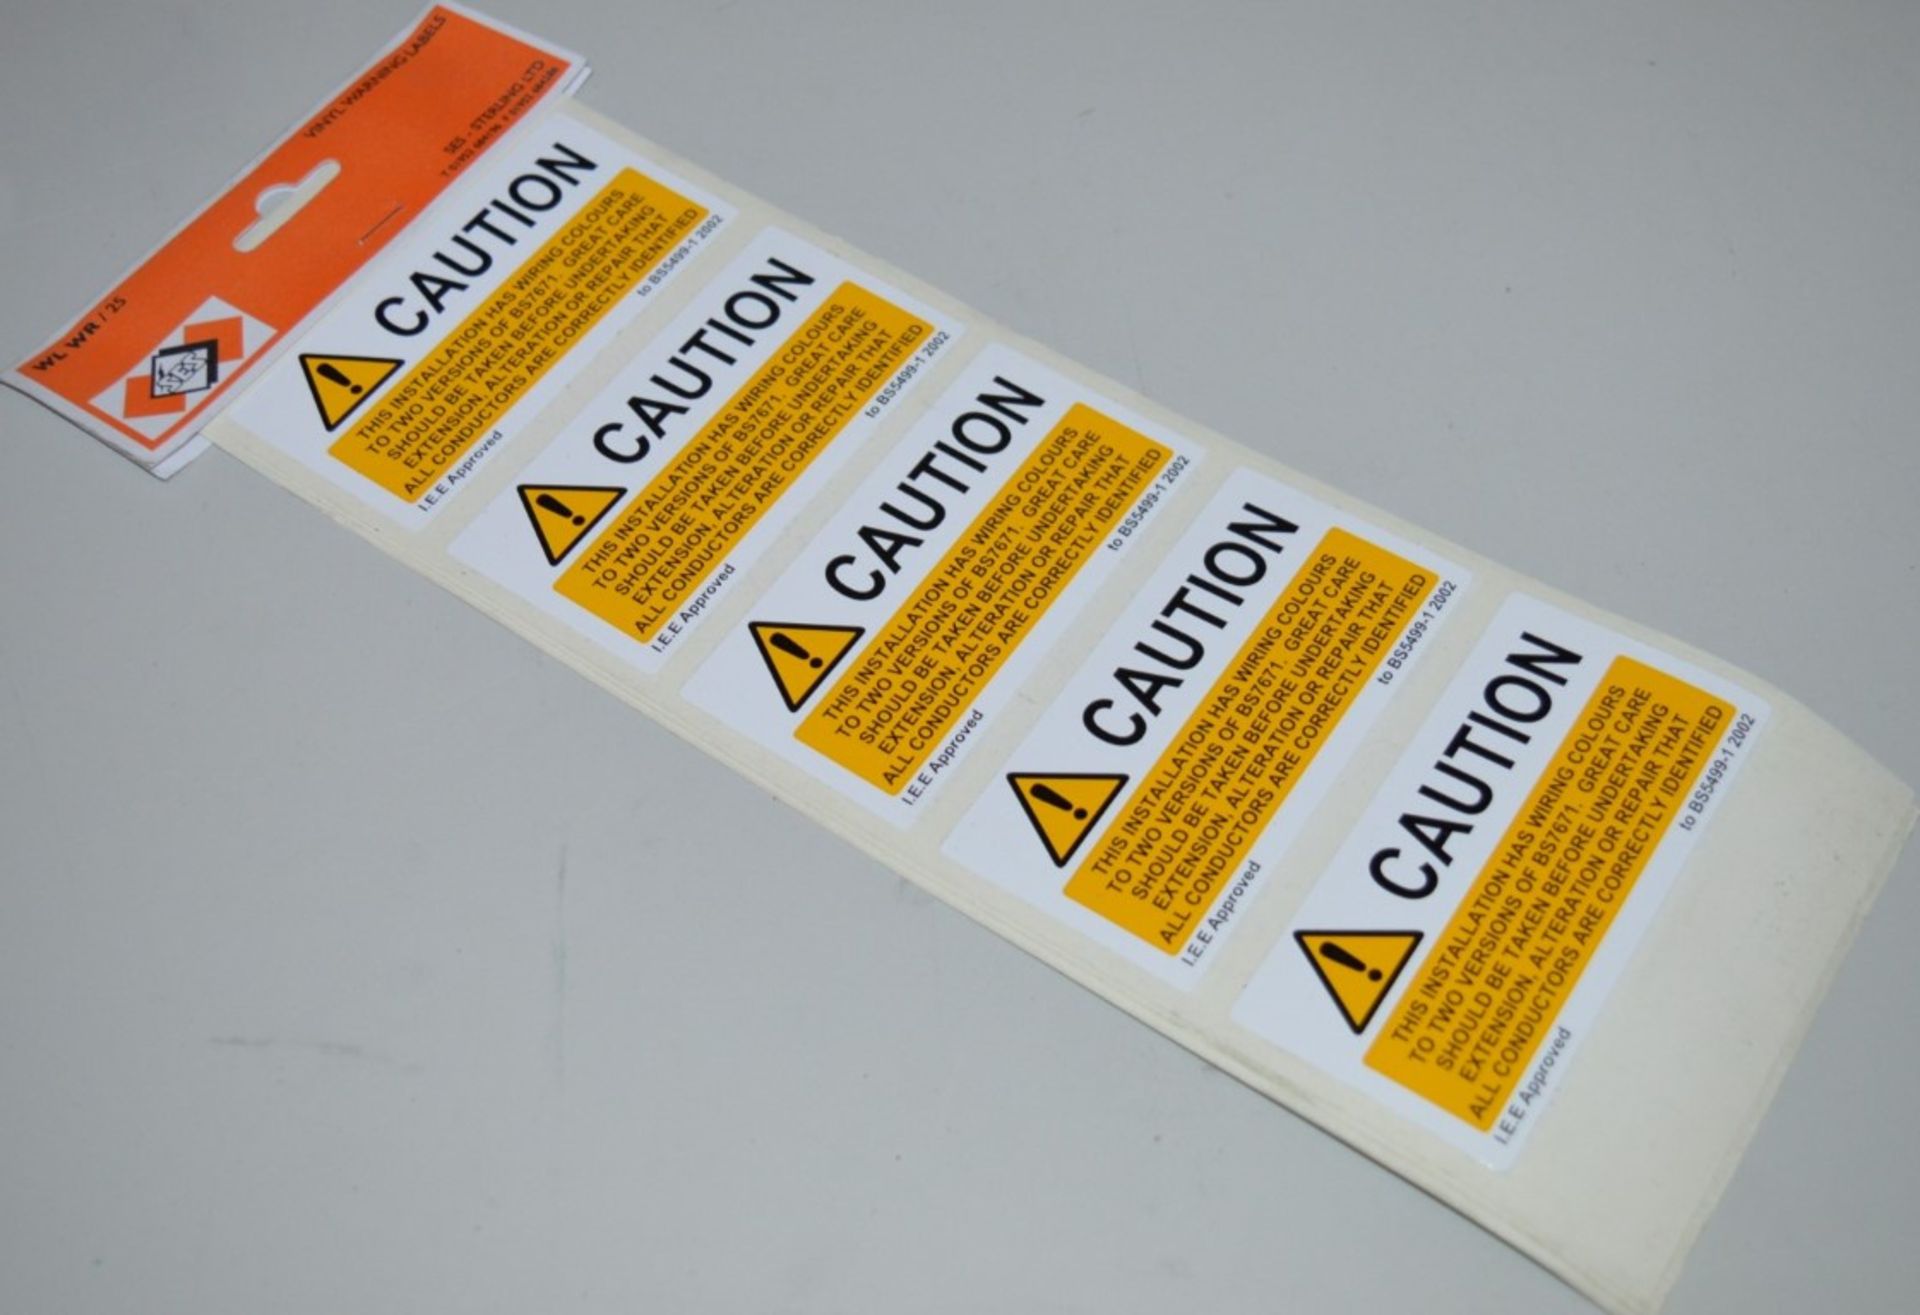 500 x Caution BS7671 Lables - Includes 20 x Packs of x 25 Lables - For Use on Electrical Equipment - Image 8 of 8